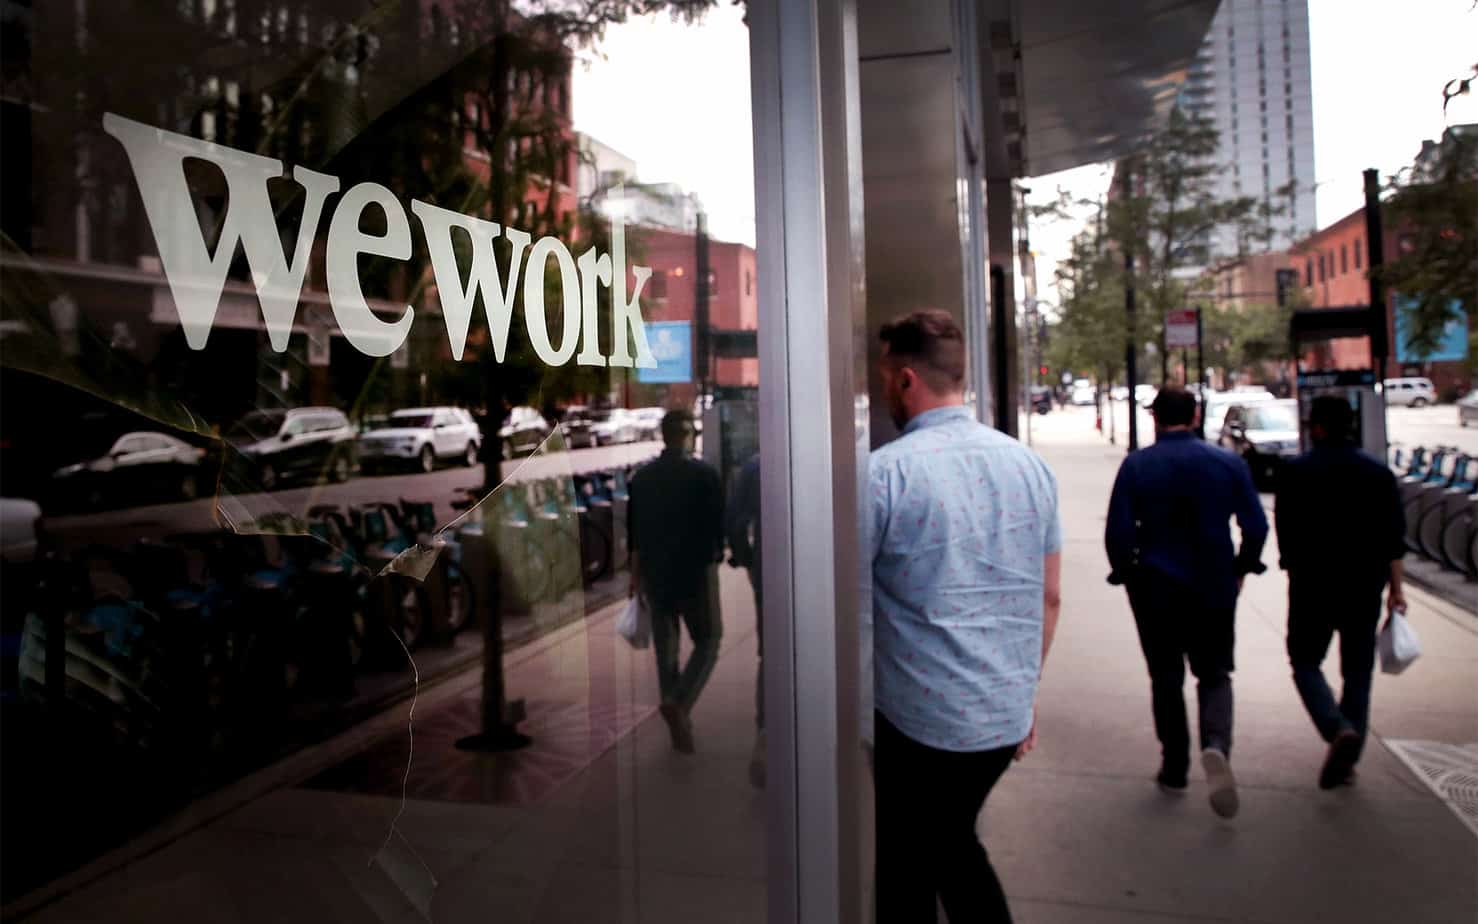 WeWork Eyes Earlier Than Expected IPO